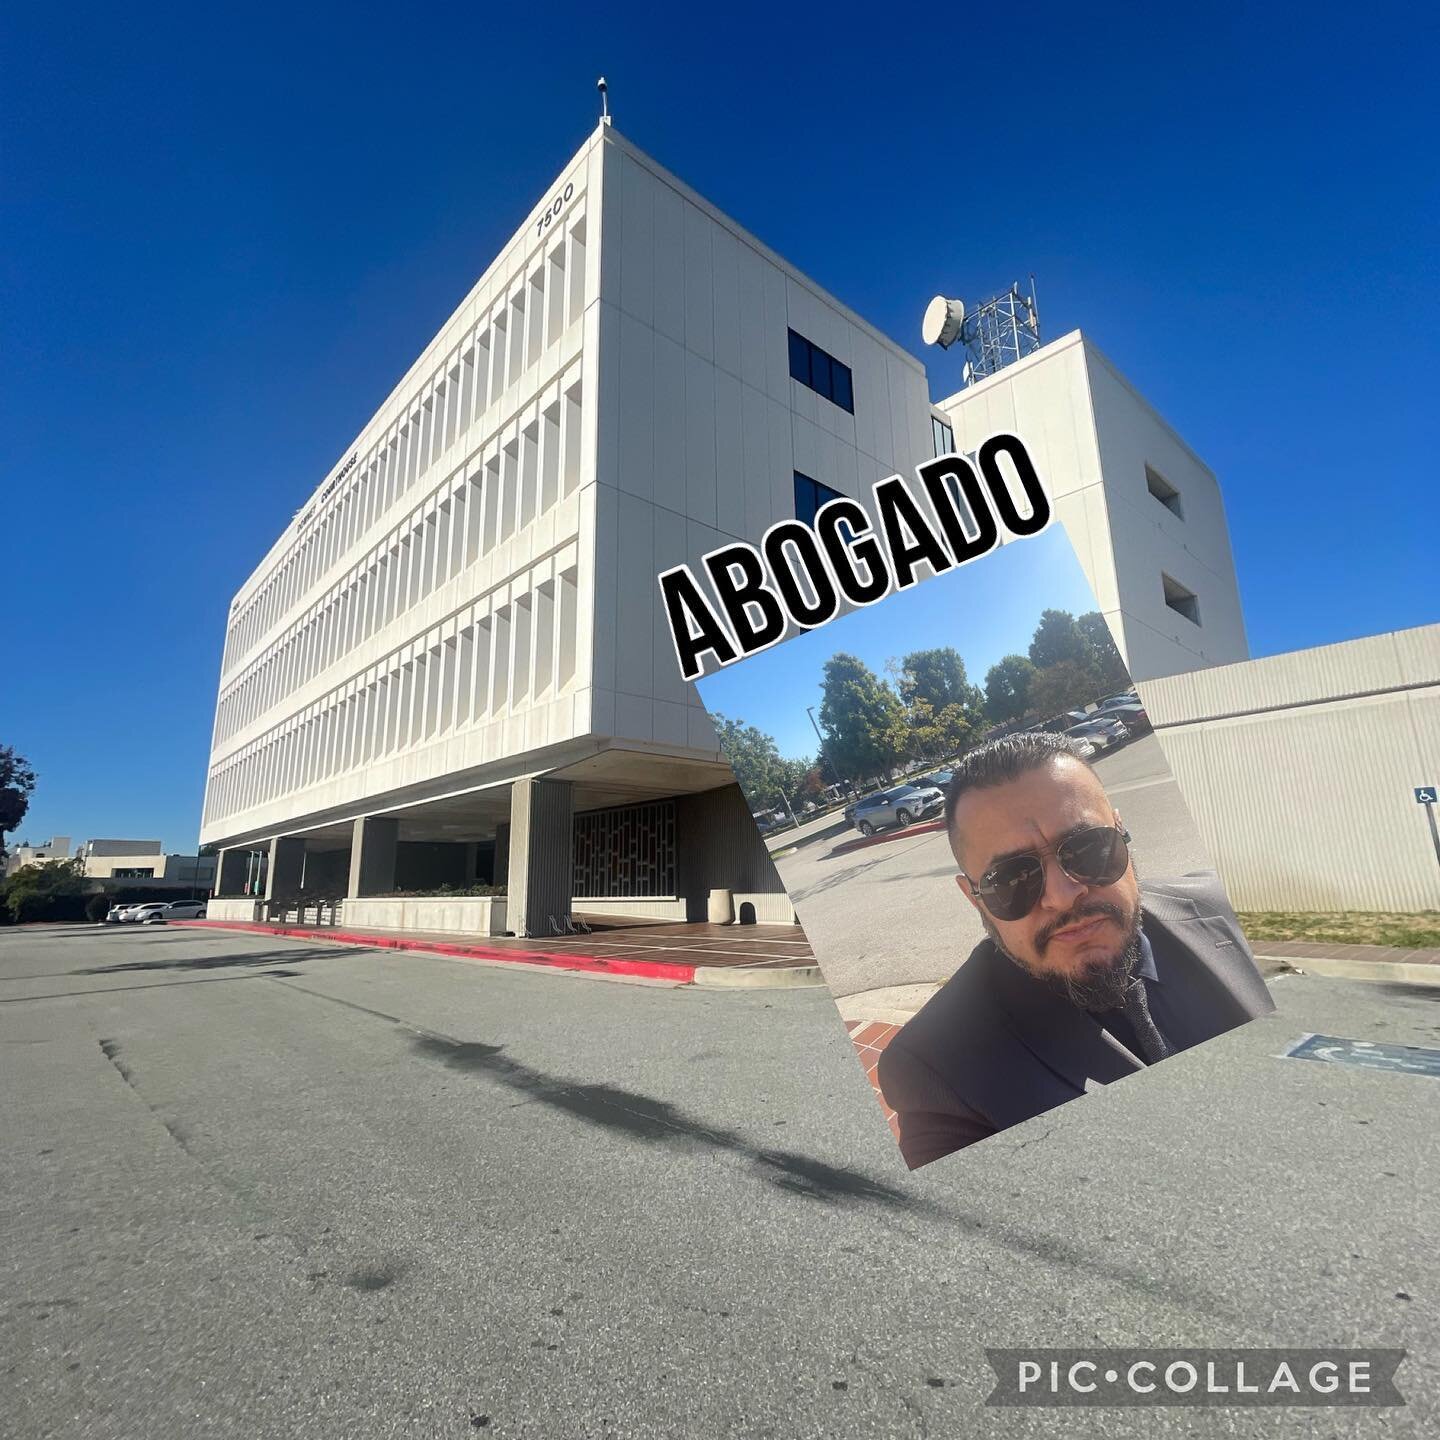 Downey in the afternoon to deal with an issue involving the DOJ and firearms registered to my client.  #abogado #hablamosespa&ntilde;ol #downey #bellflower #losangeles #la